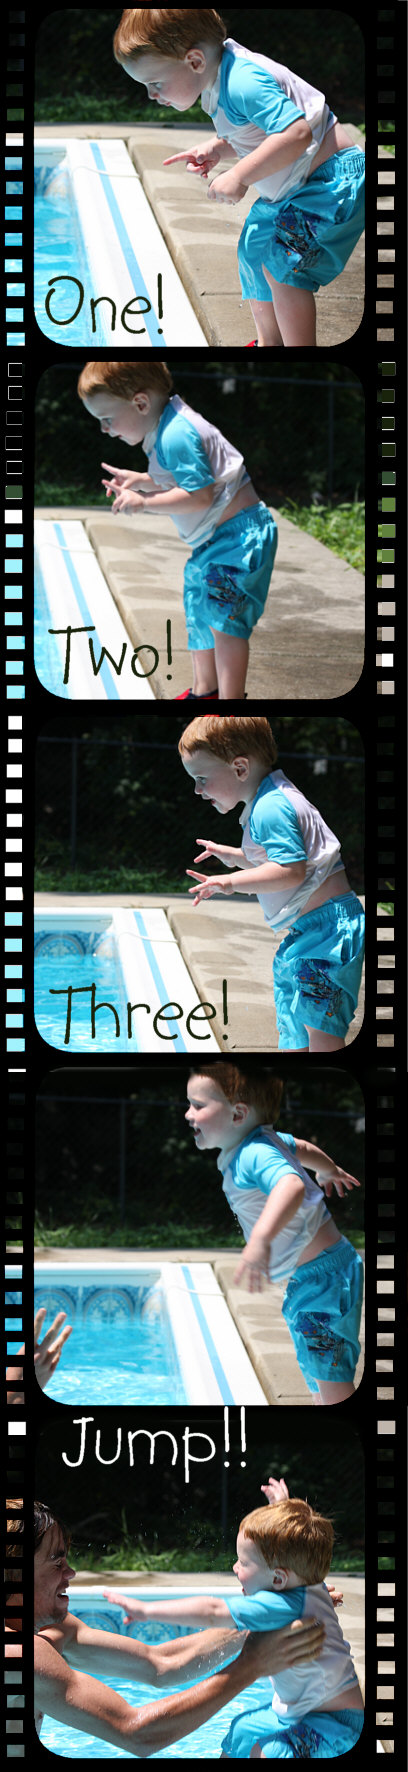 Aiden jumps into the pool